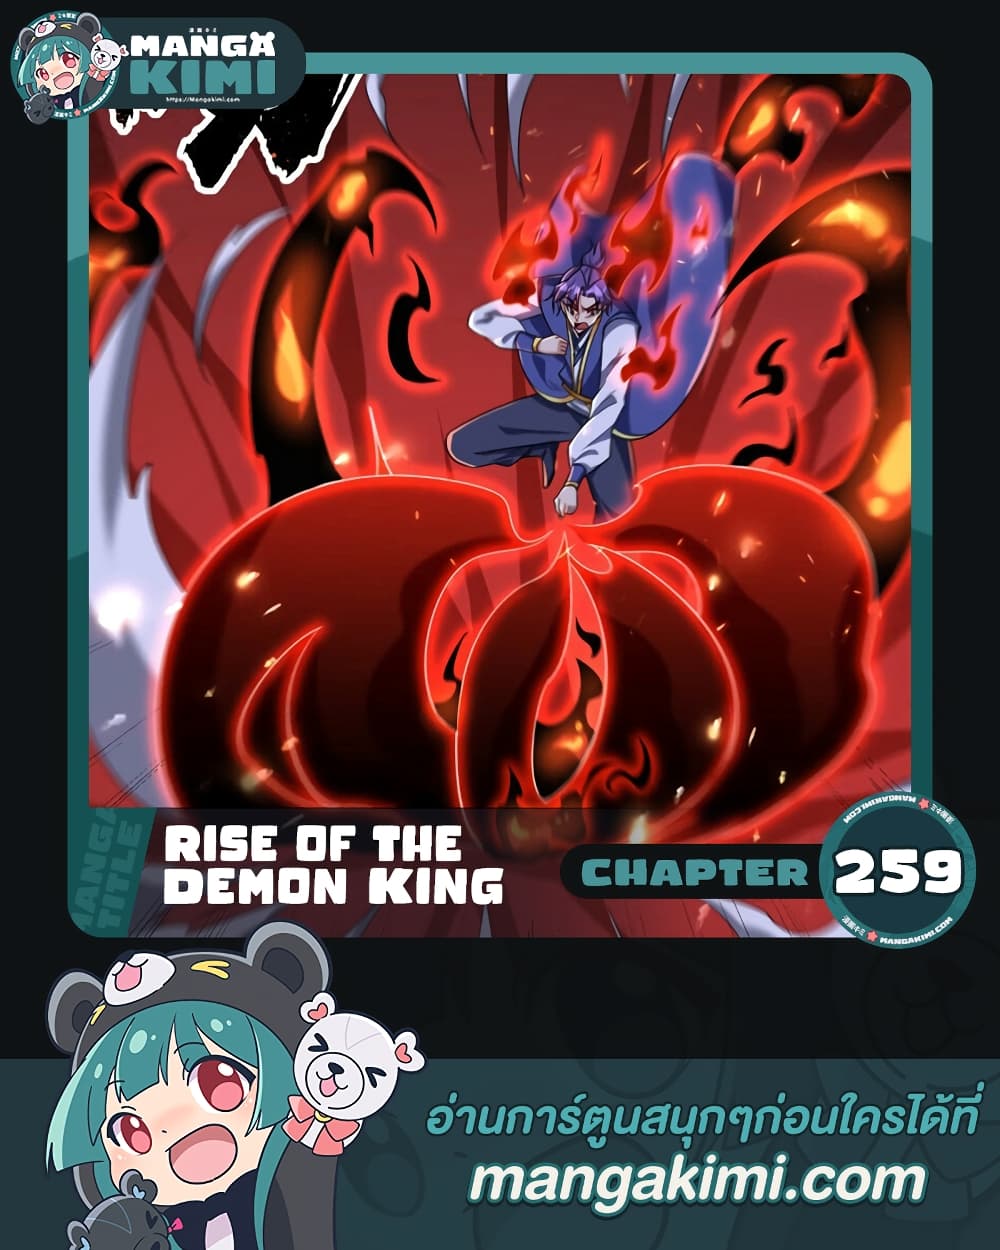 Rise of The Demon King เธฃเธธเนเธเธญเธฃเธธเธ“เนเธซเนเธเธฃเธฒเธเธฒเธเธตเธจเธฒเธ เธ•เธญเธเธ—เธตเน 259 (1)